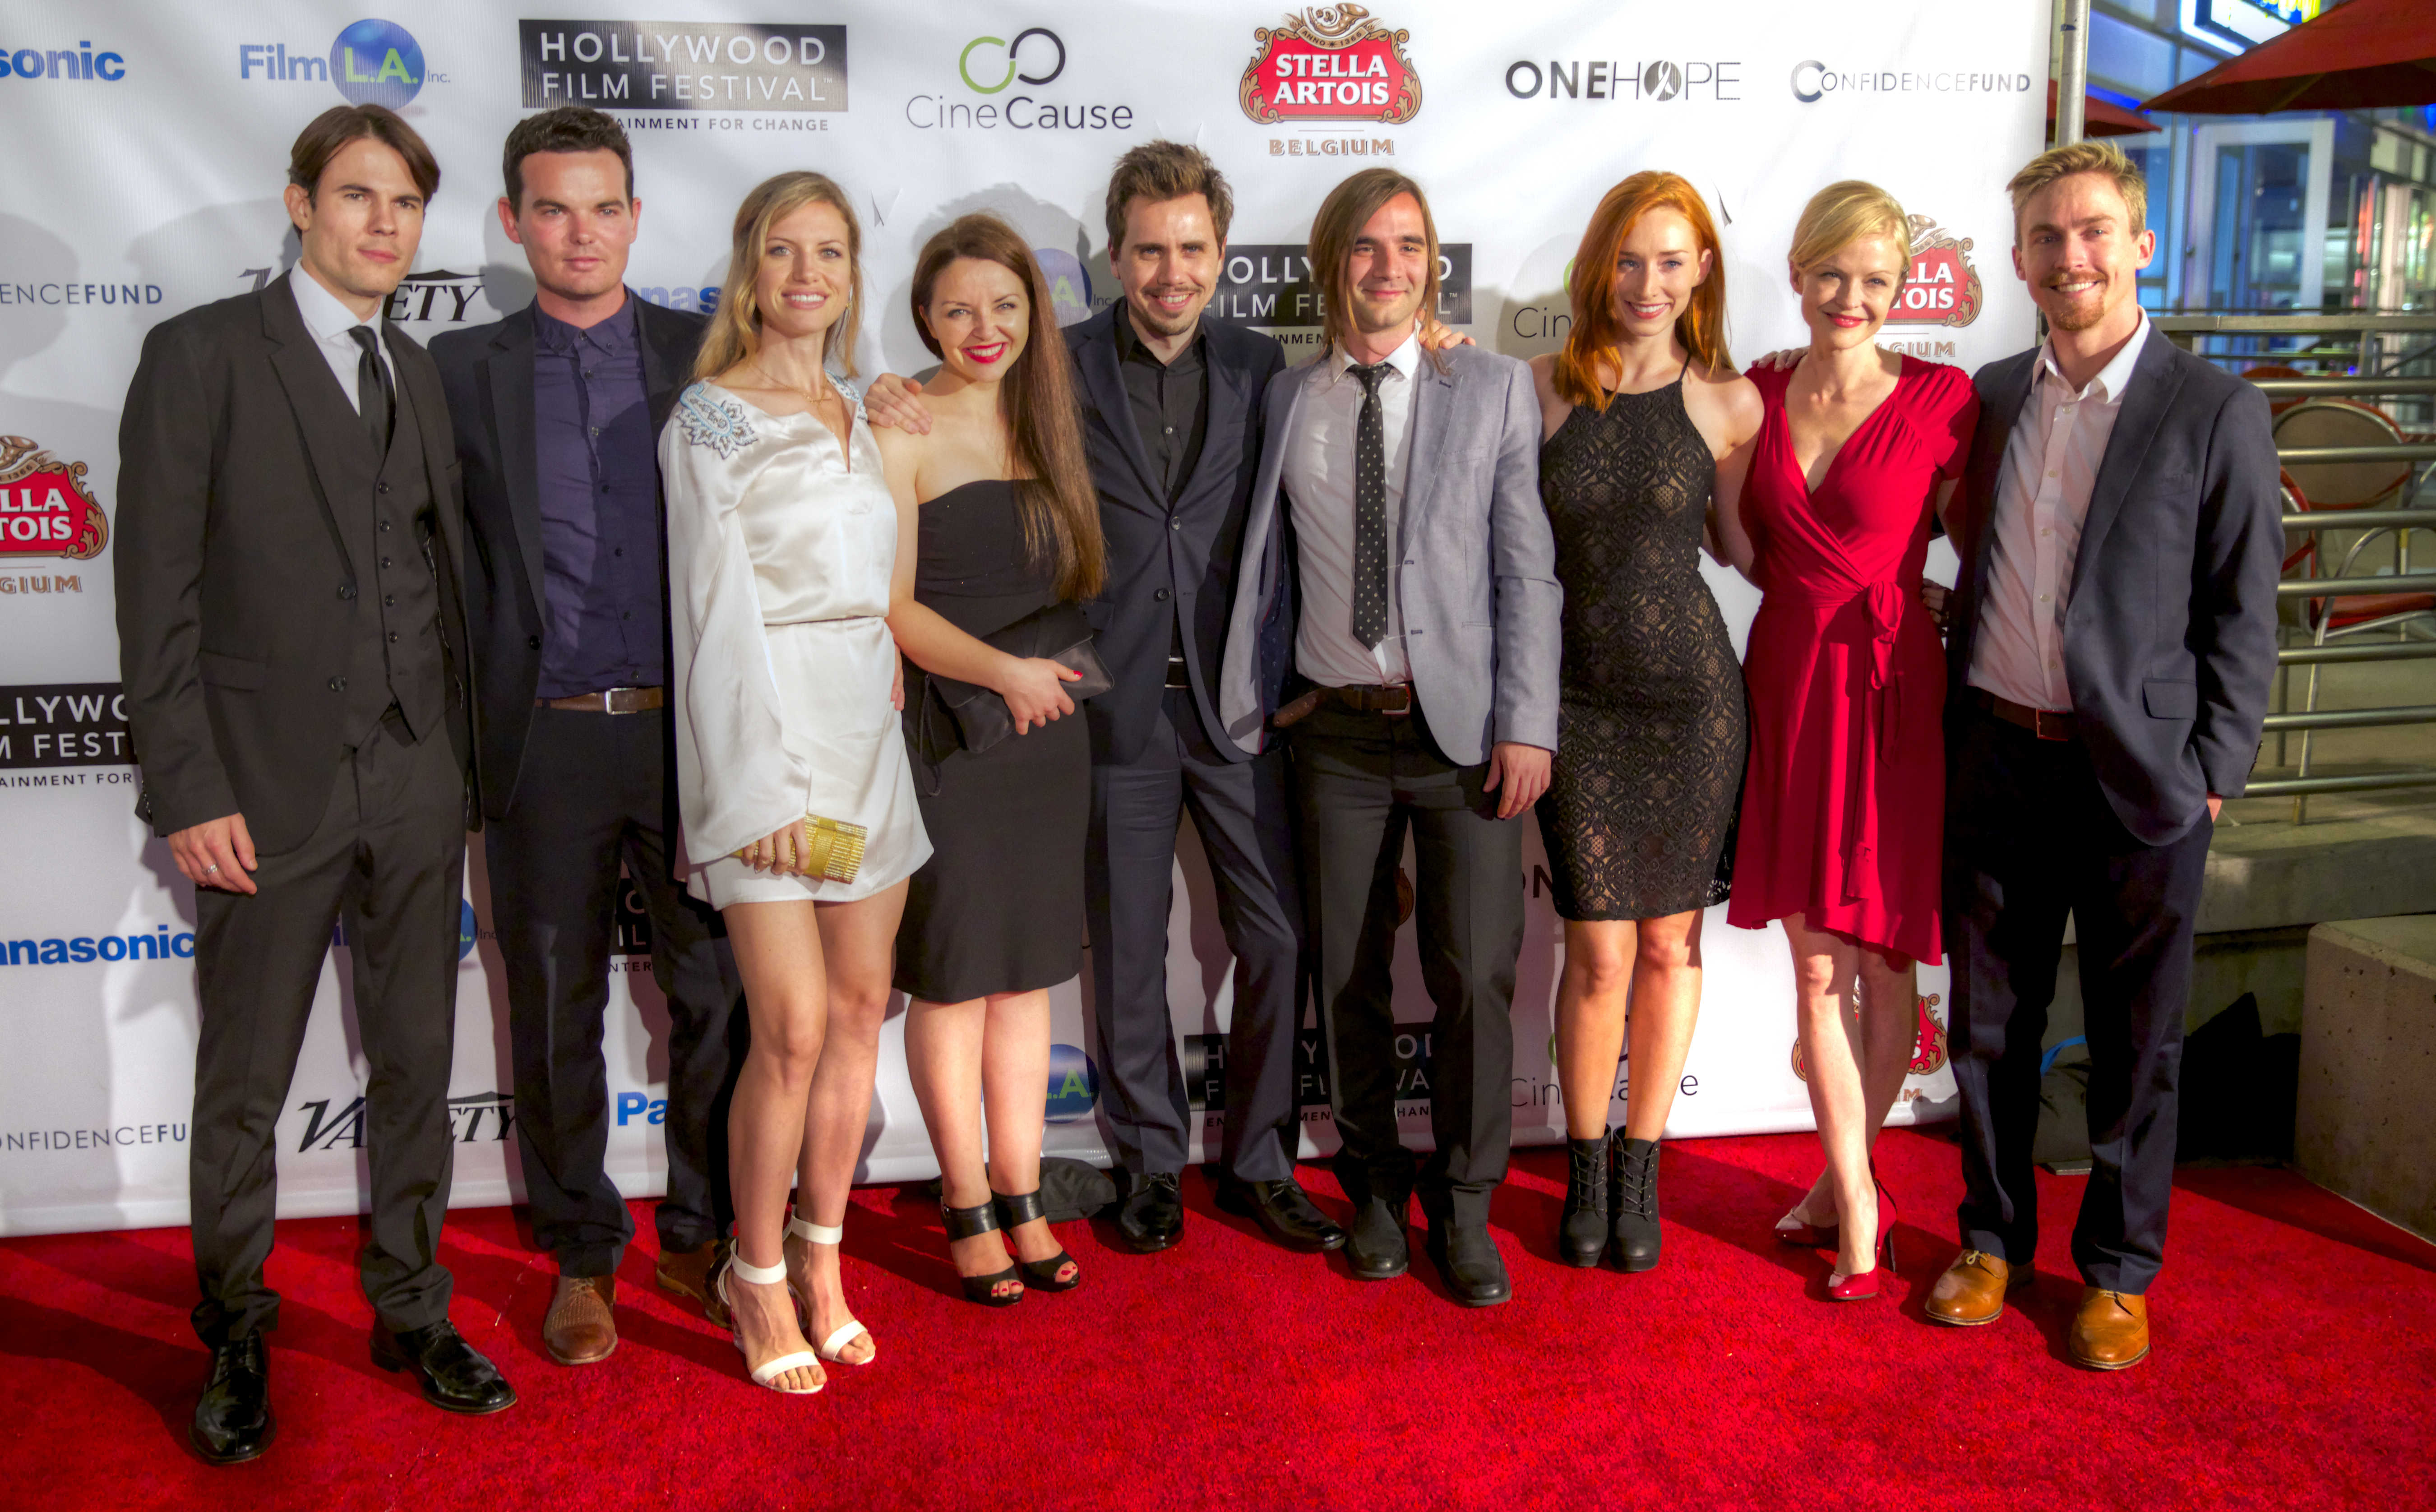 'The Toy Soldiers' at The Hollywood Film Festival - Arclight Theater - October 2014 w/ cast.